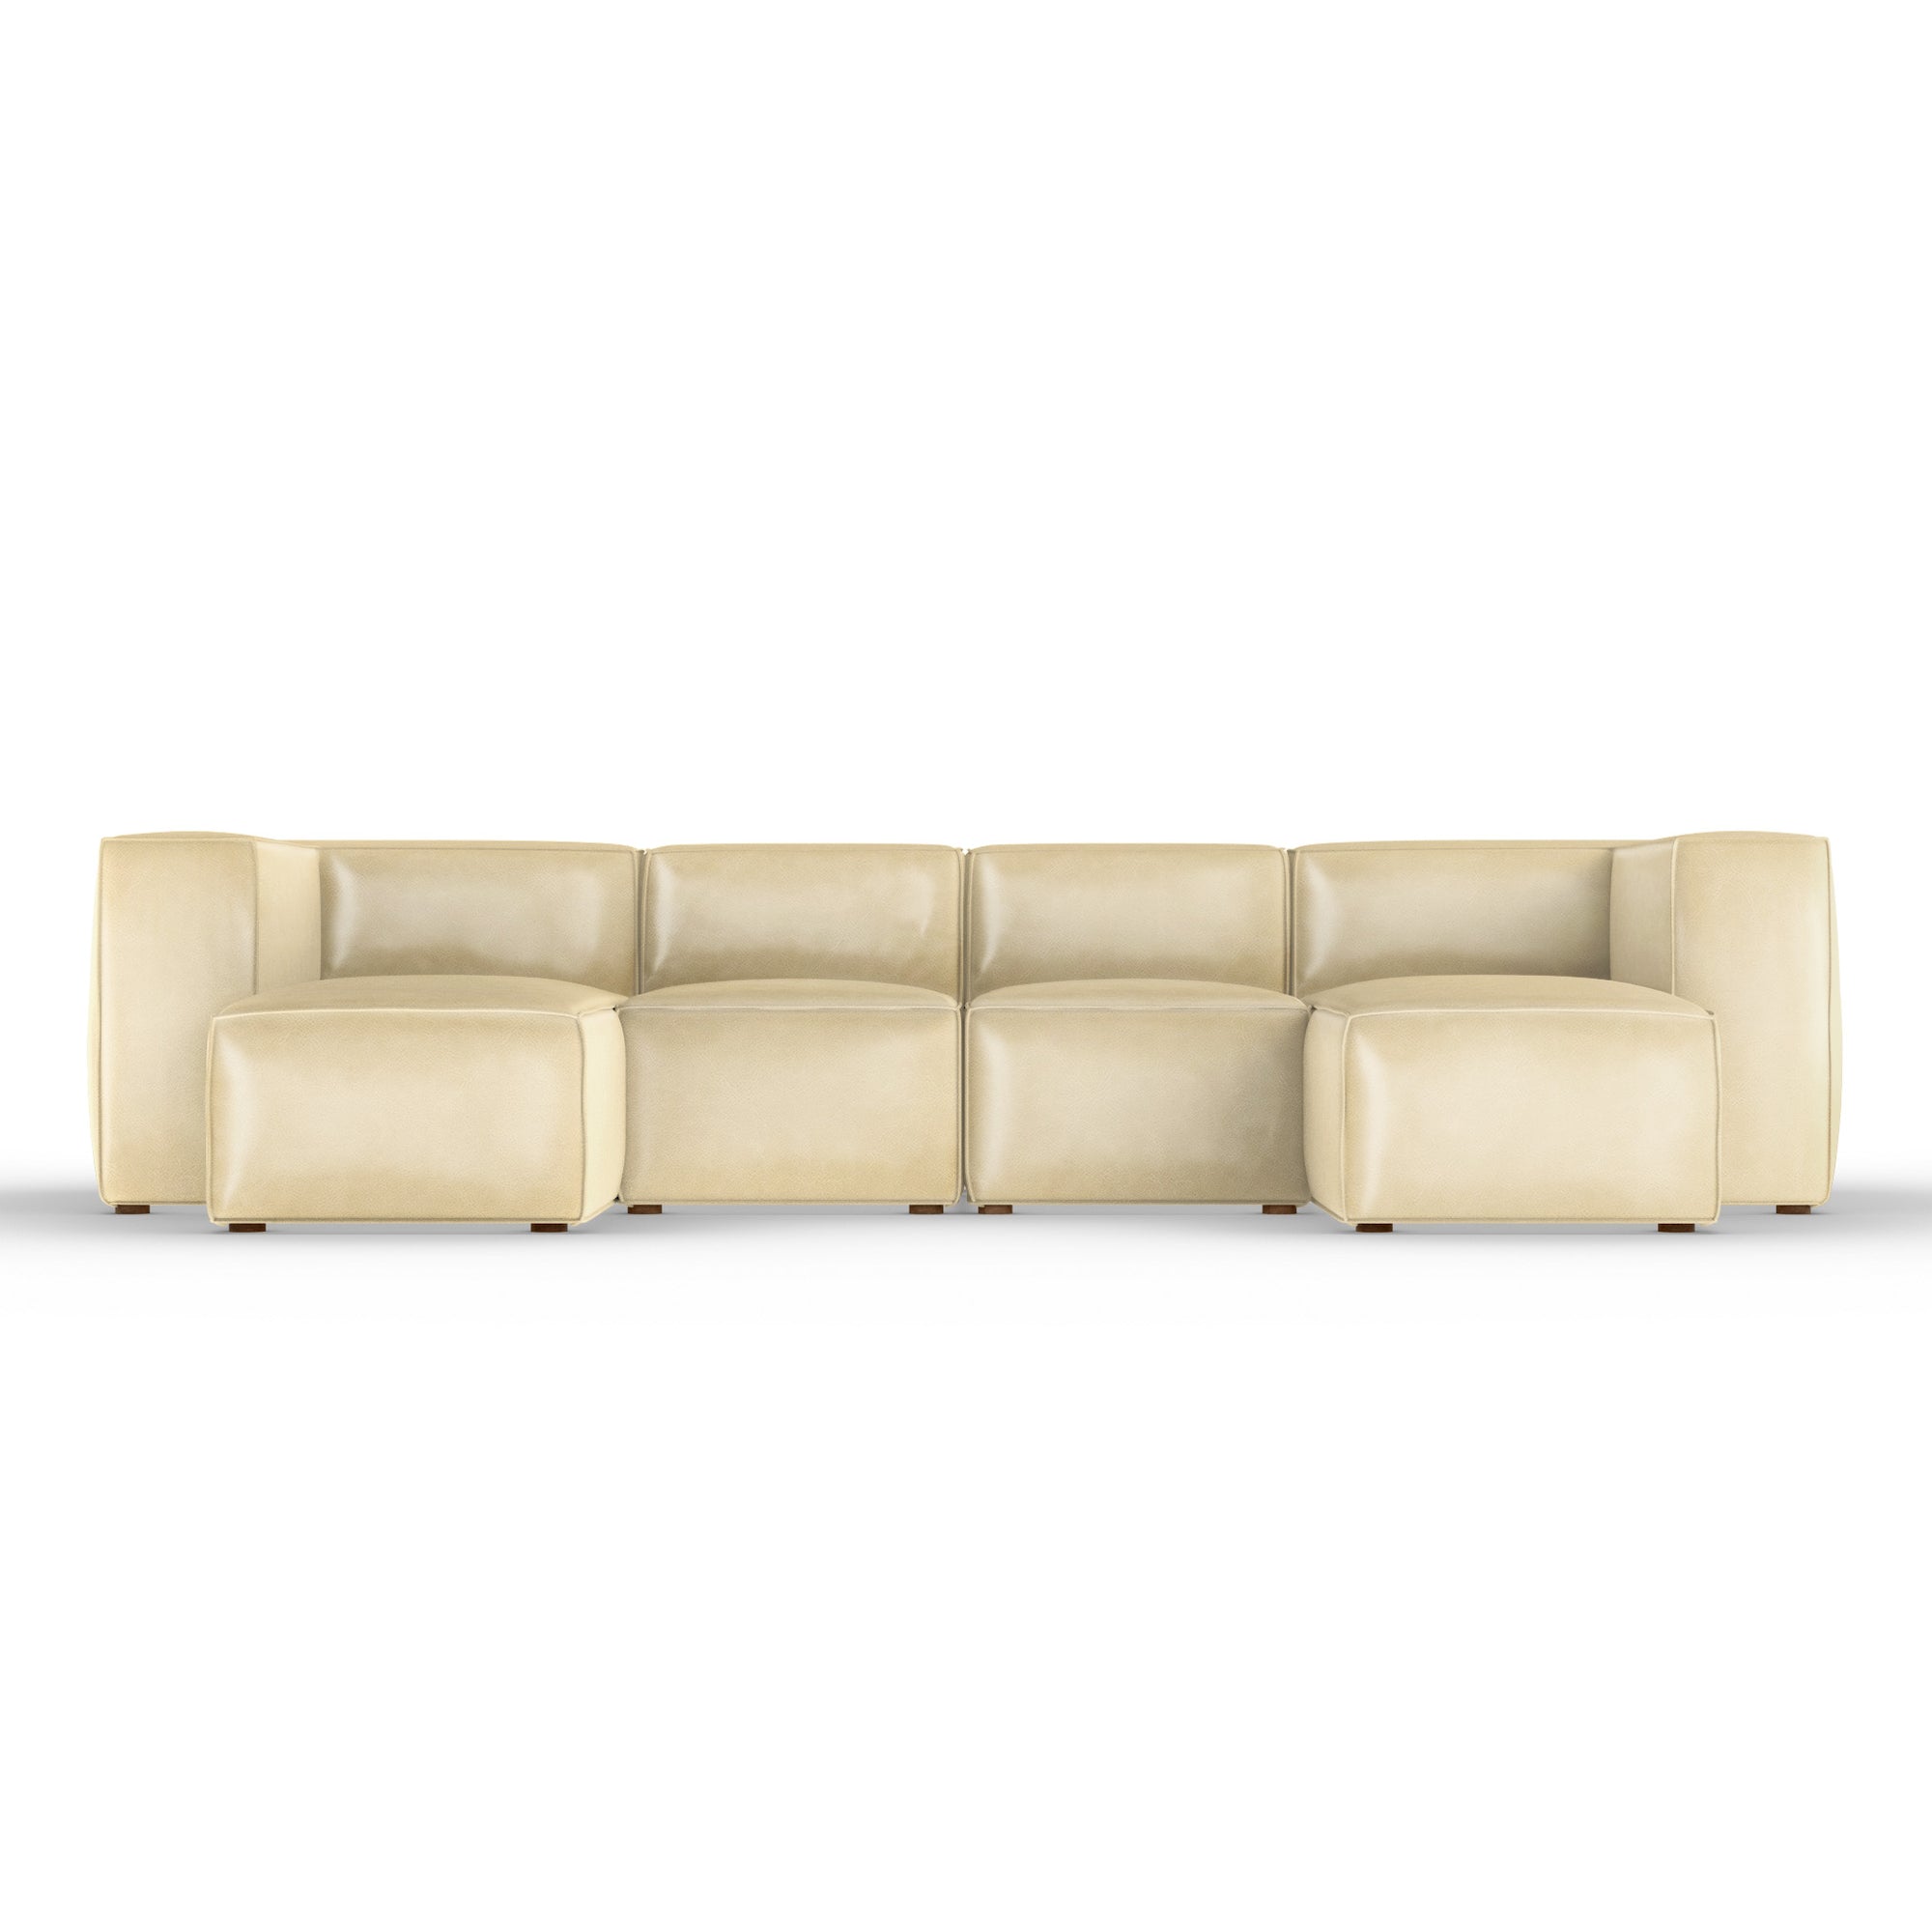 Varick U-Chaise Sectional - Oyster Vintage Leather